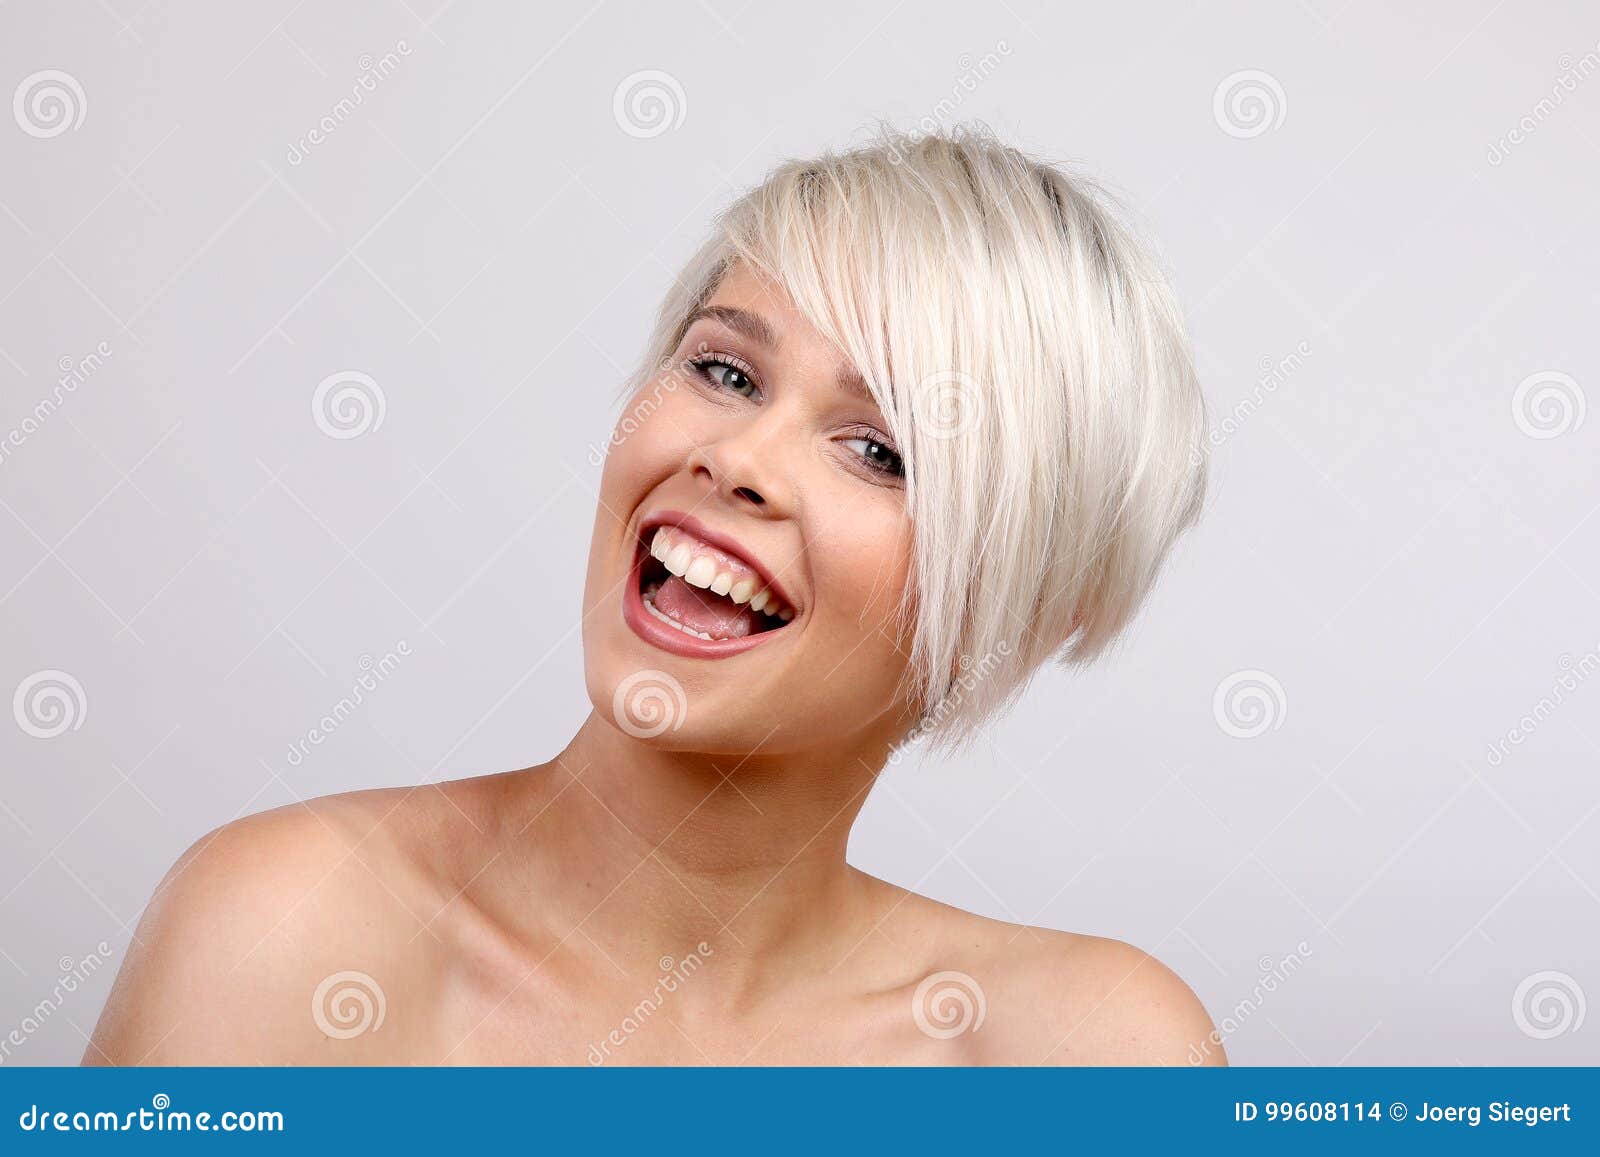 Blond Woman With Naked Shoulders Smiling Stock Image 